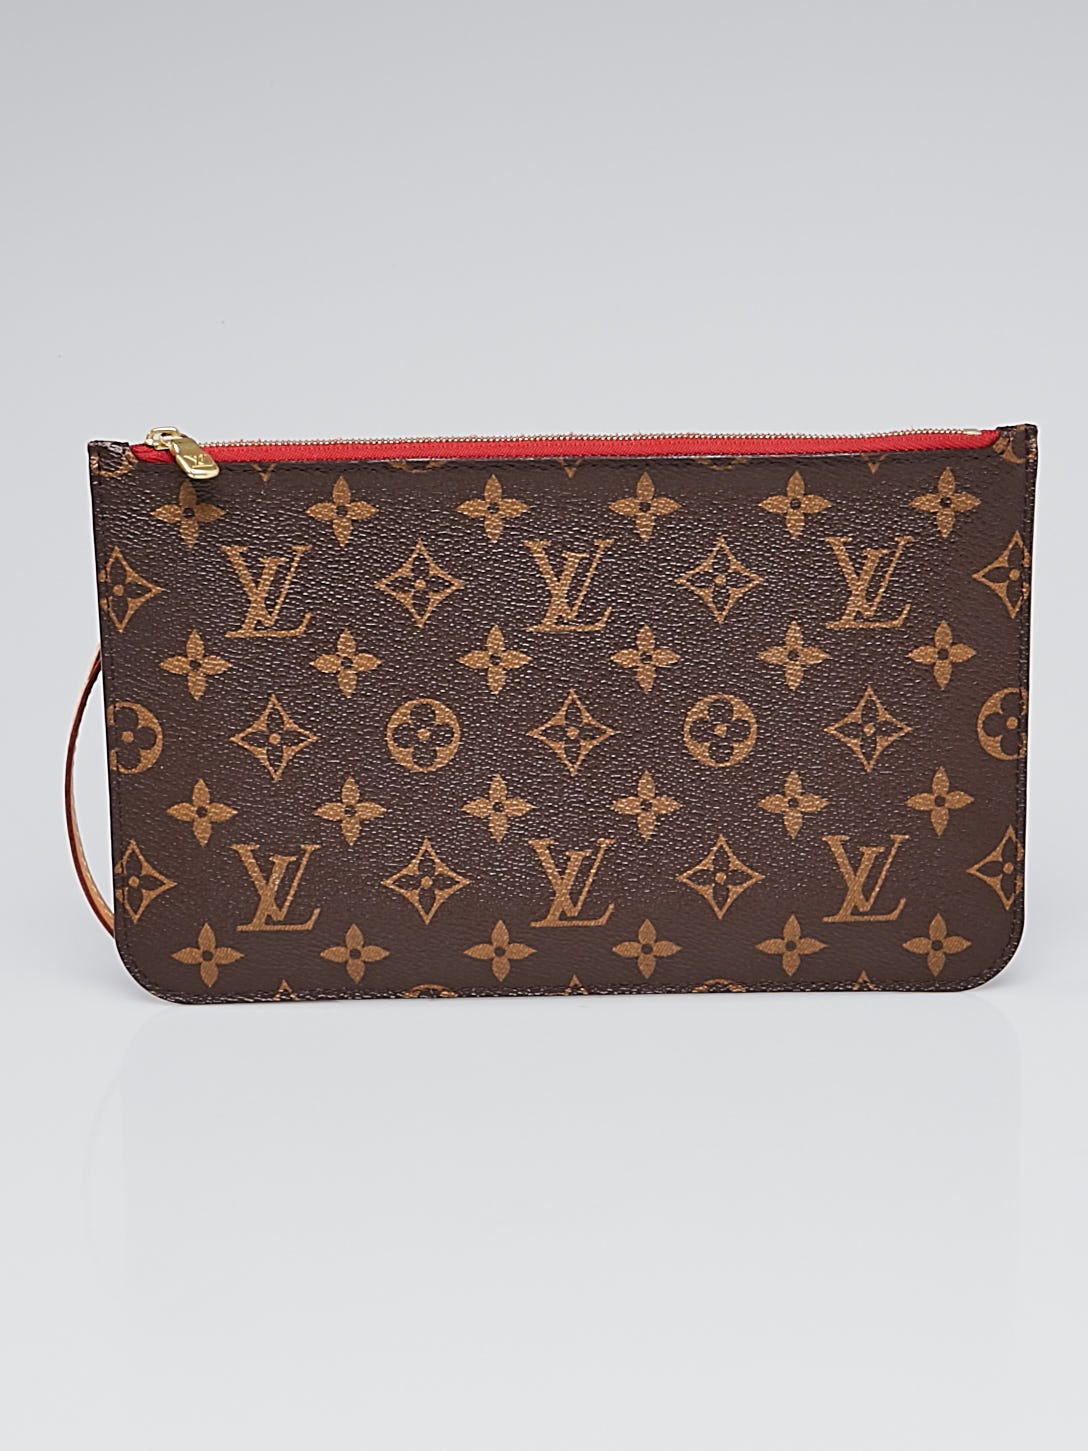 LOUIS VUITTON NEVERFULL POCHETTE REVIEW, 4 Ways To Use The Pouch